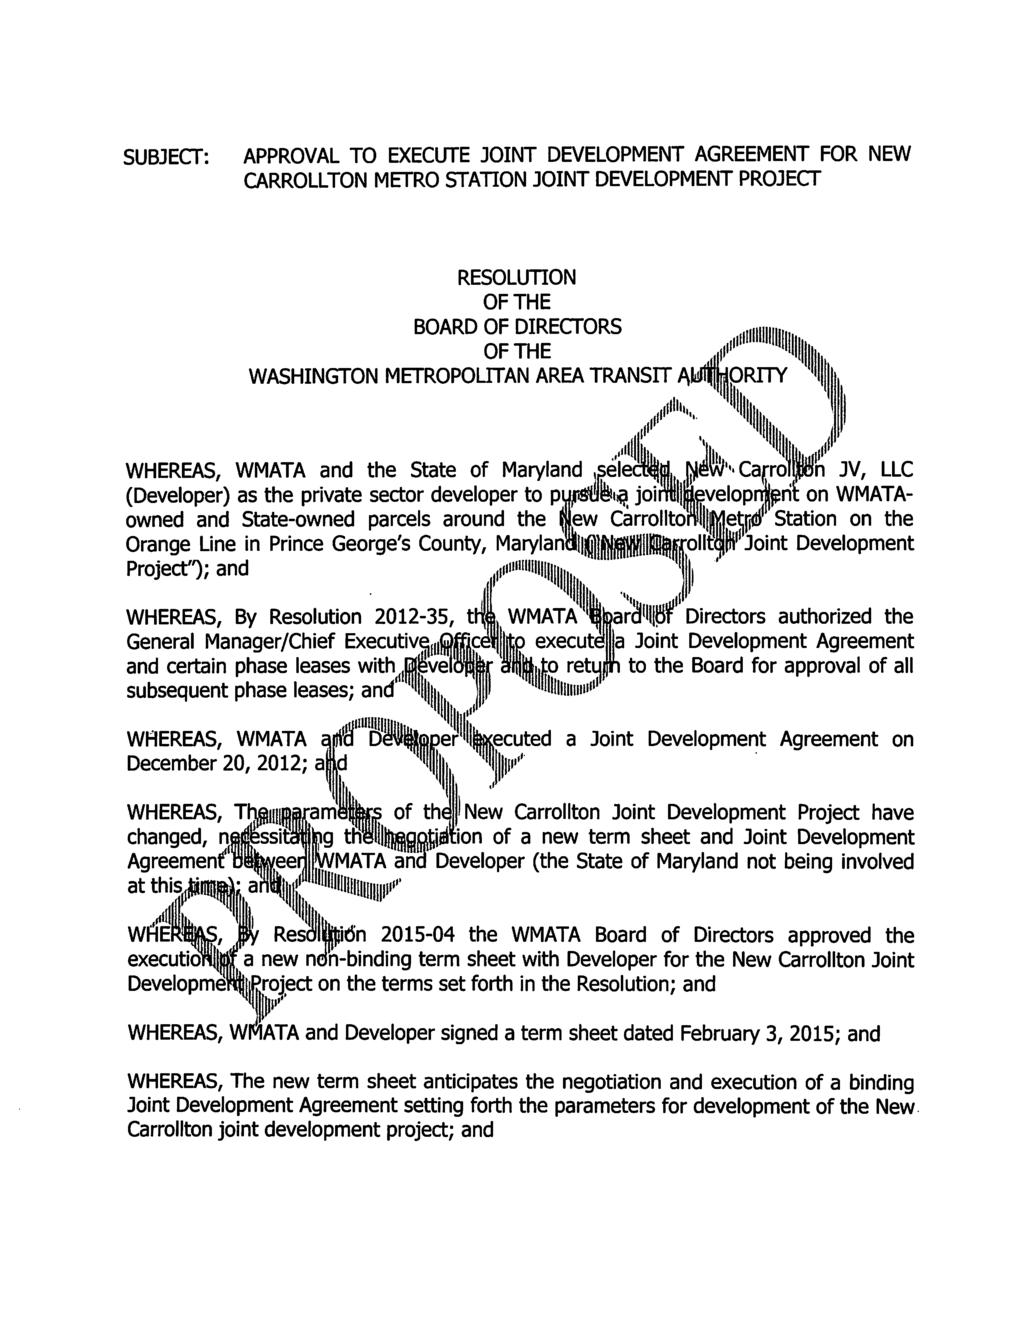 SUBJECT: APPROVAL TO EXECUTE JOINT DEVELOPMENT AGREEMENT FOR NEW CARROLLTON METRO STATION JOINT DEVELOPMENT PROJECT RESOLUTION OF THE BOARD OF DIRECTORS t1lllllllllll!